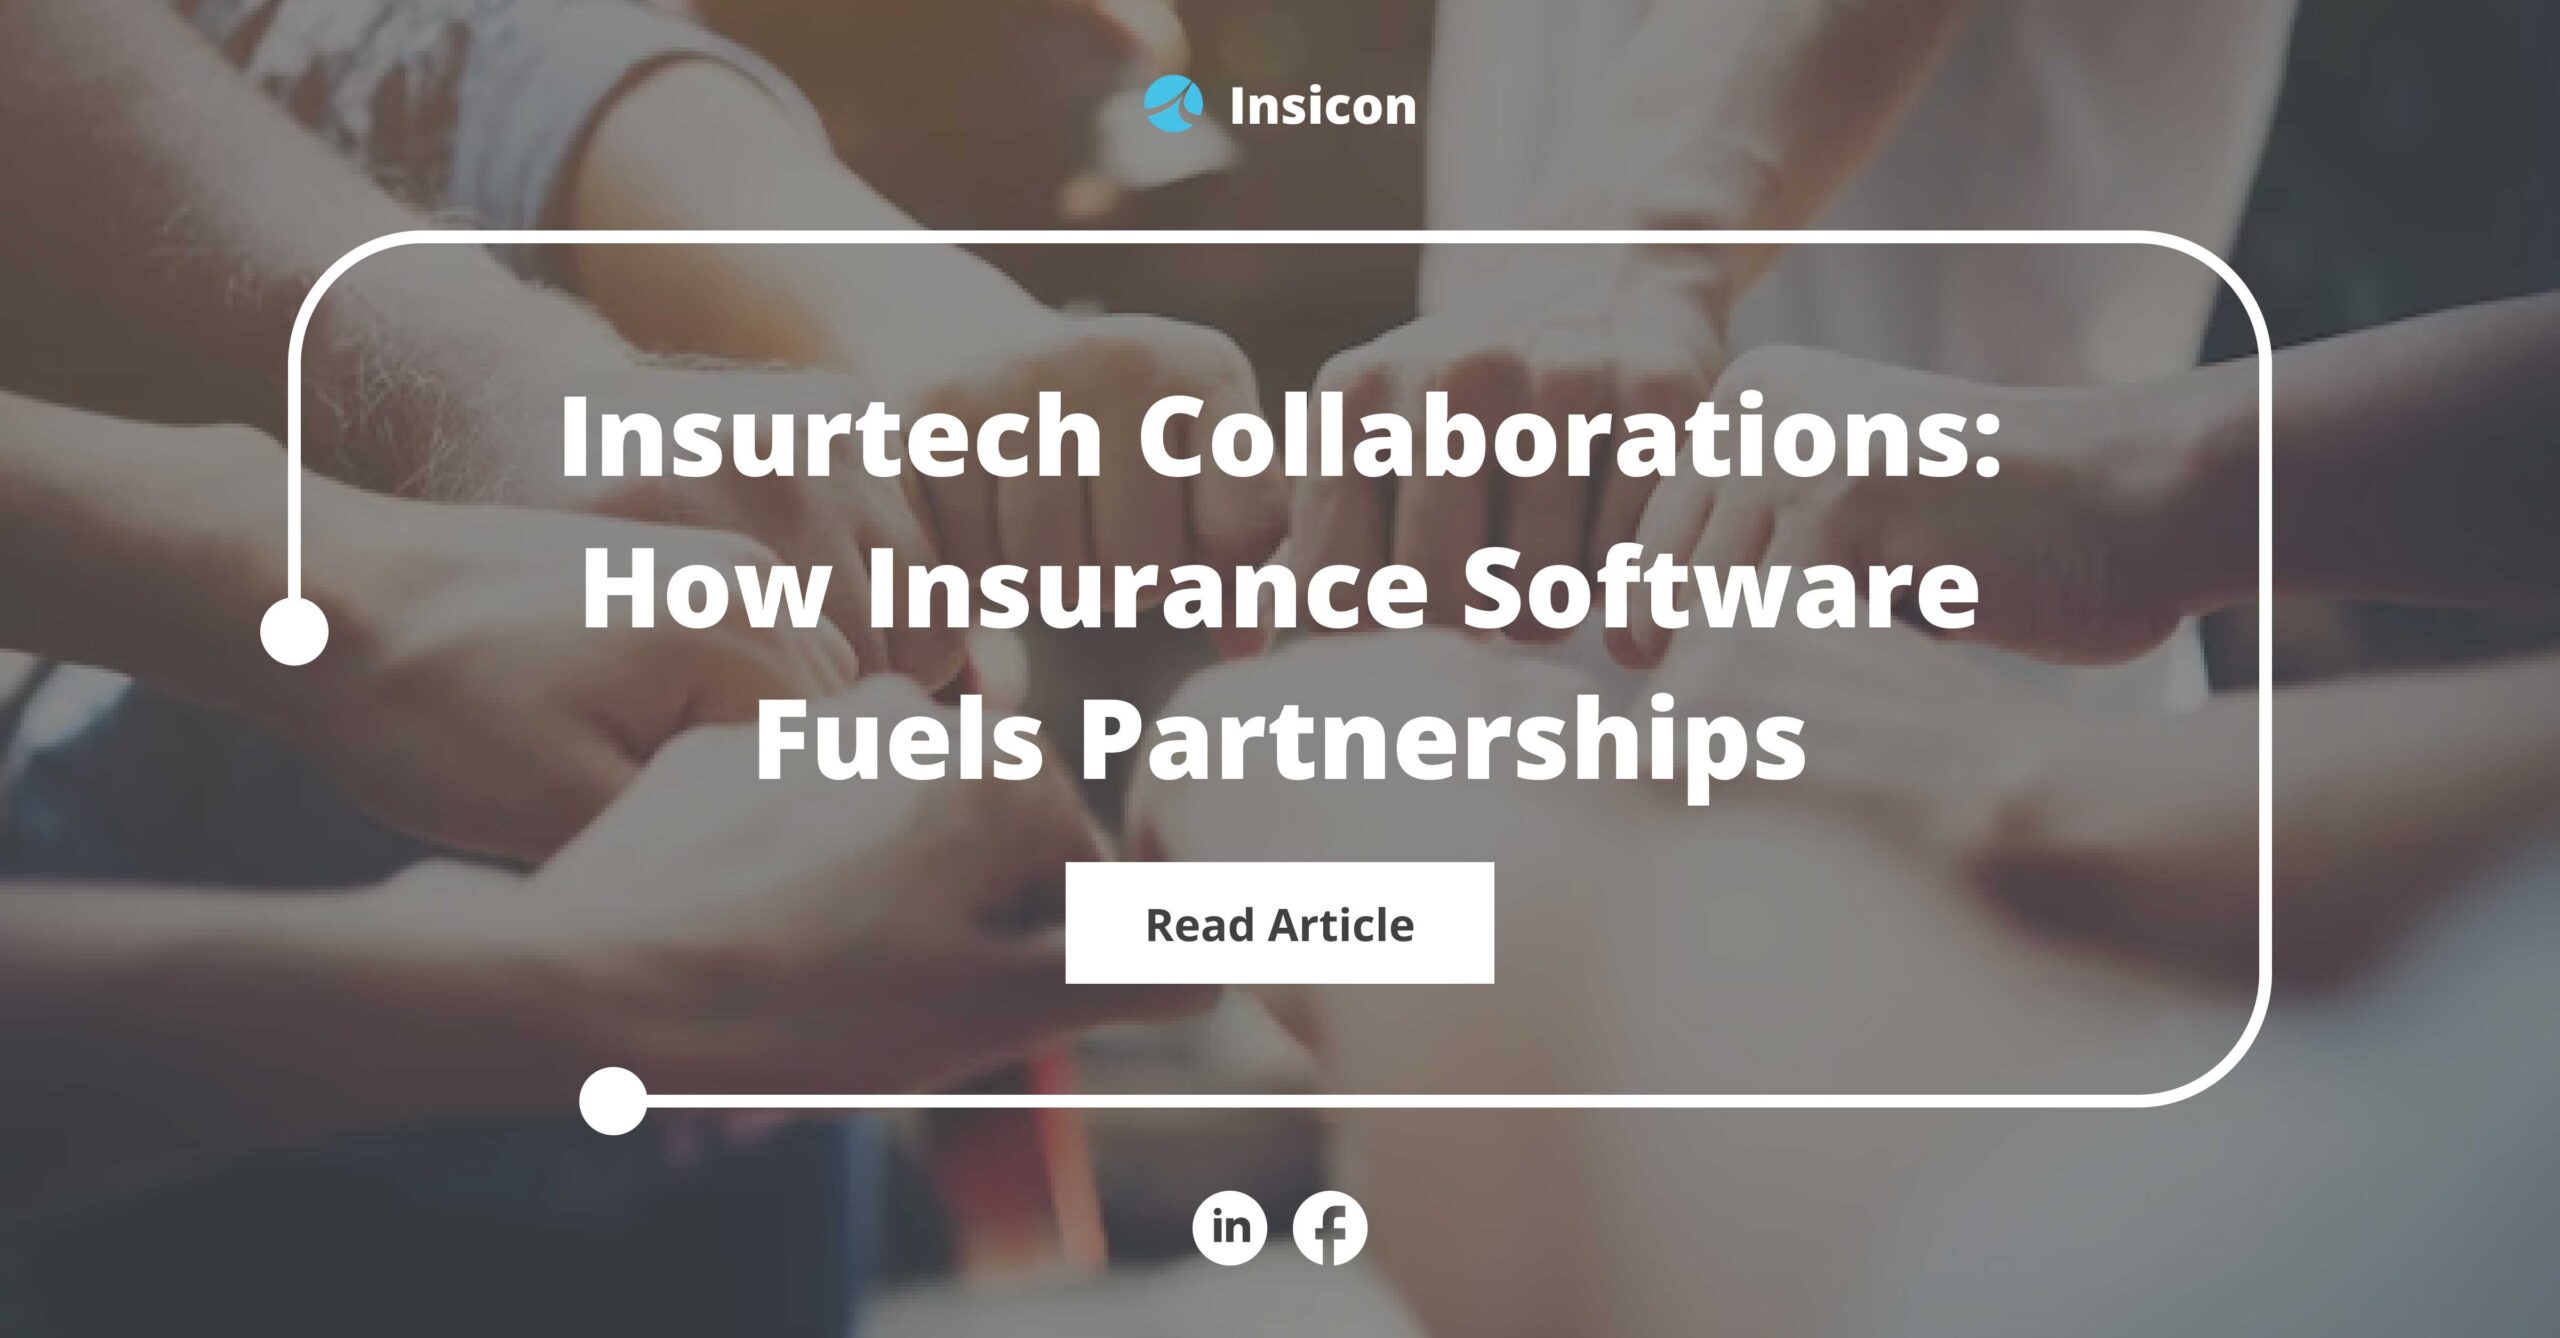 Insurtech Collaborations: How Insurance Software Fuels Partnerships